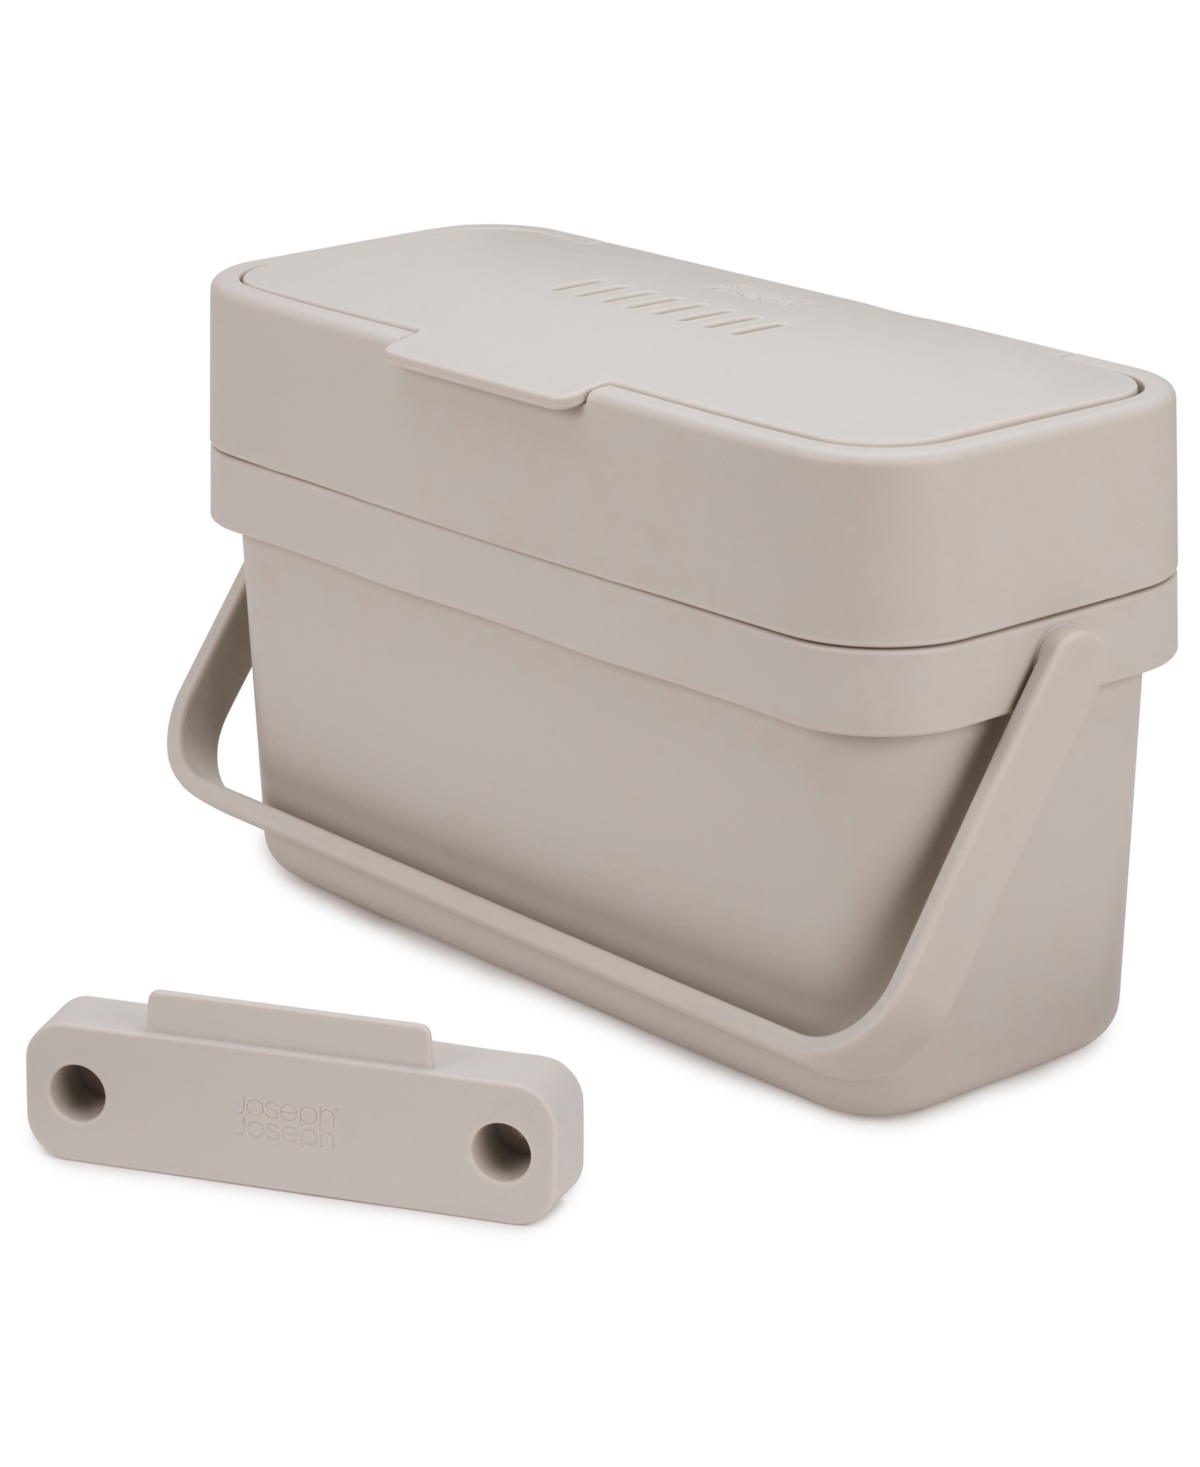 Compo 4 Easy-Fill Food Waste Caddy - Stone